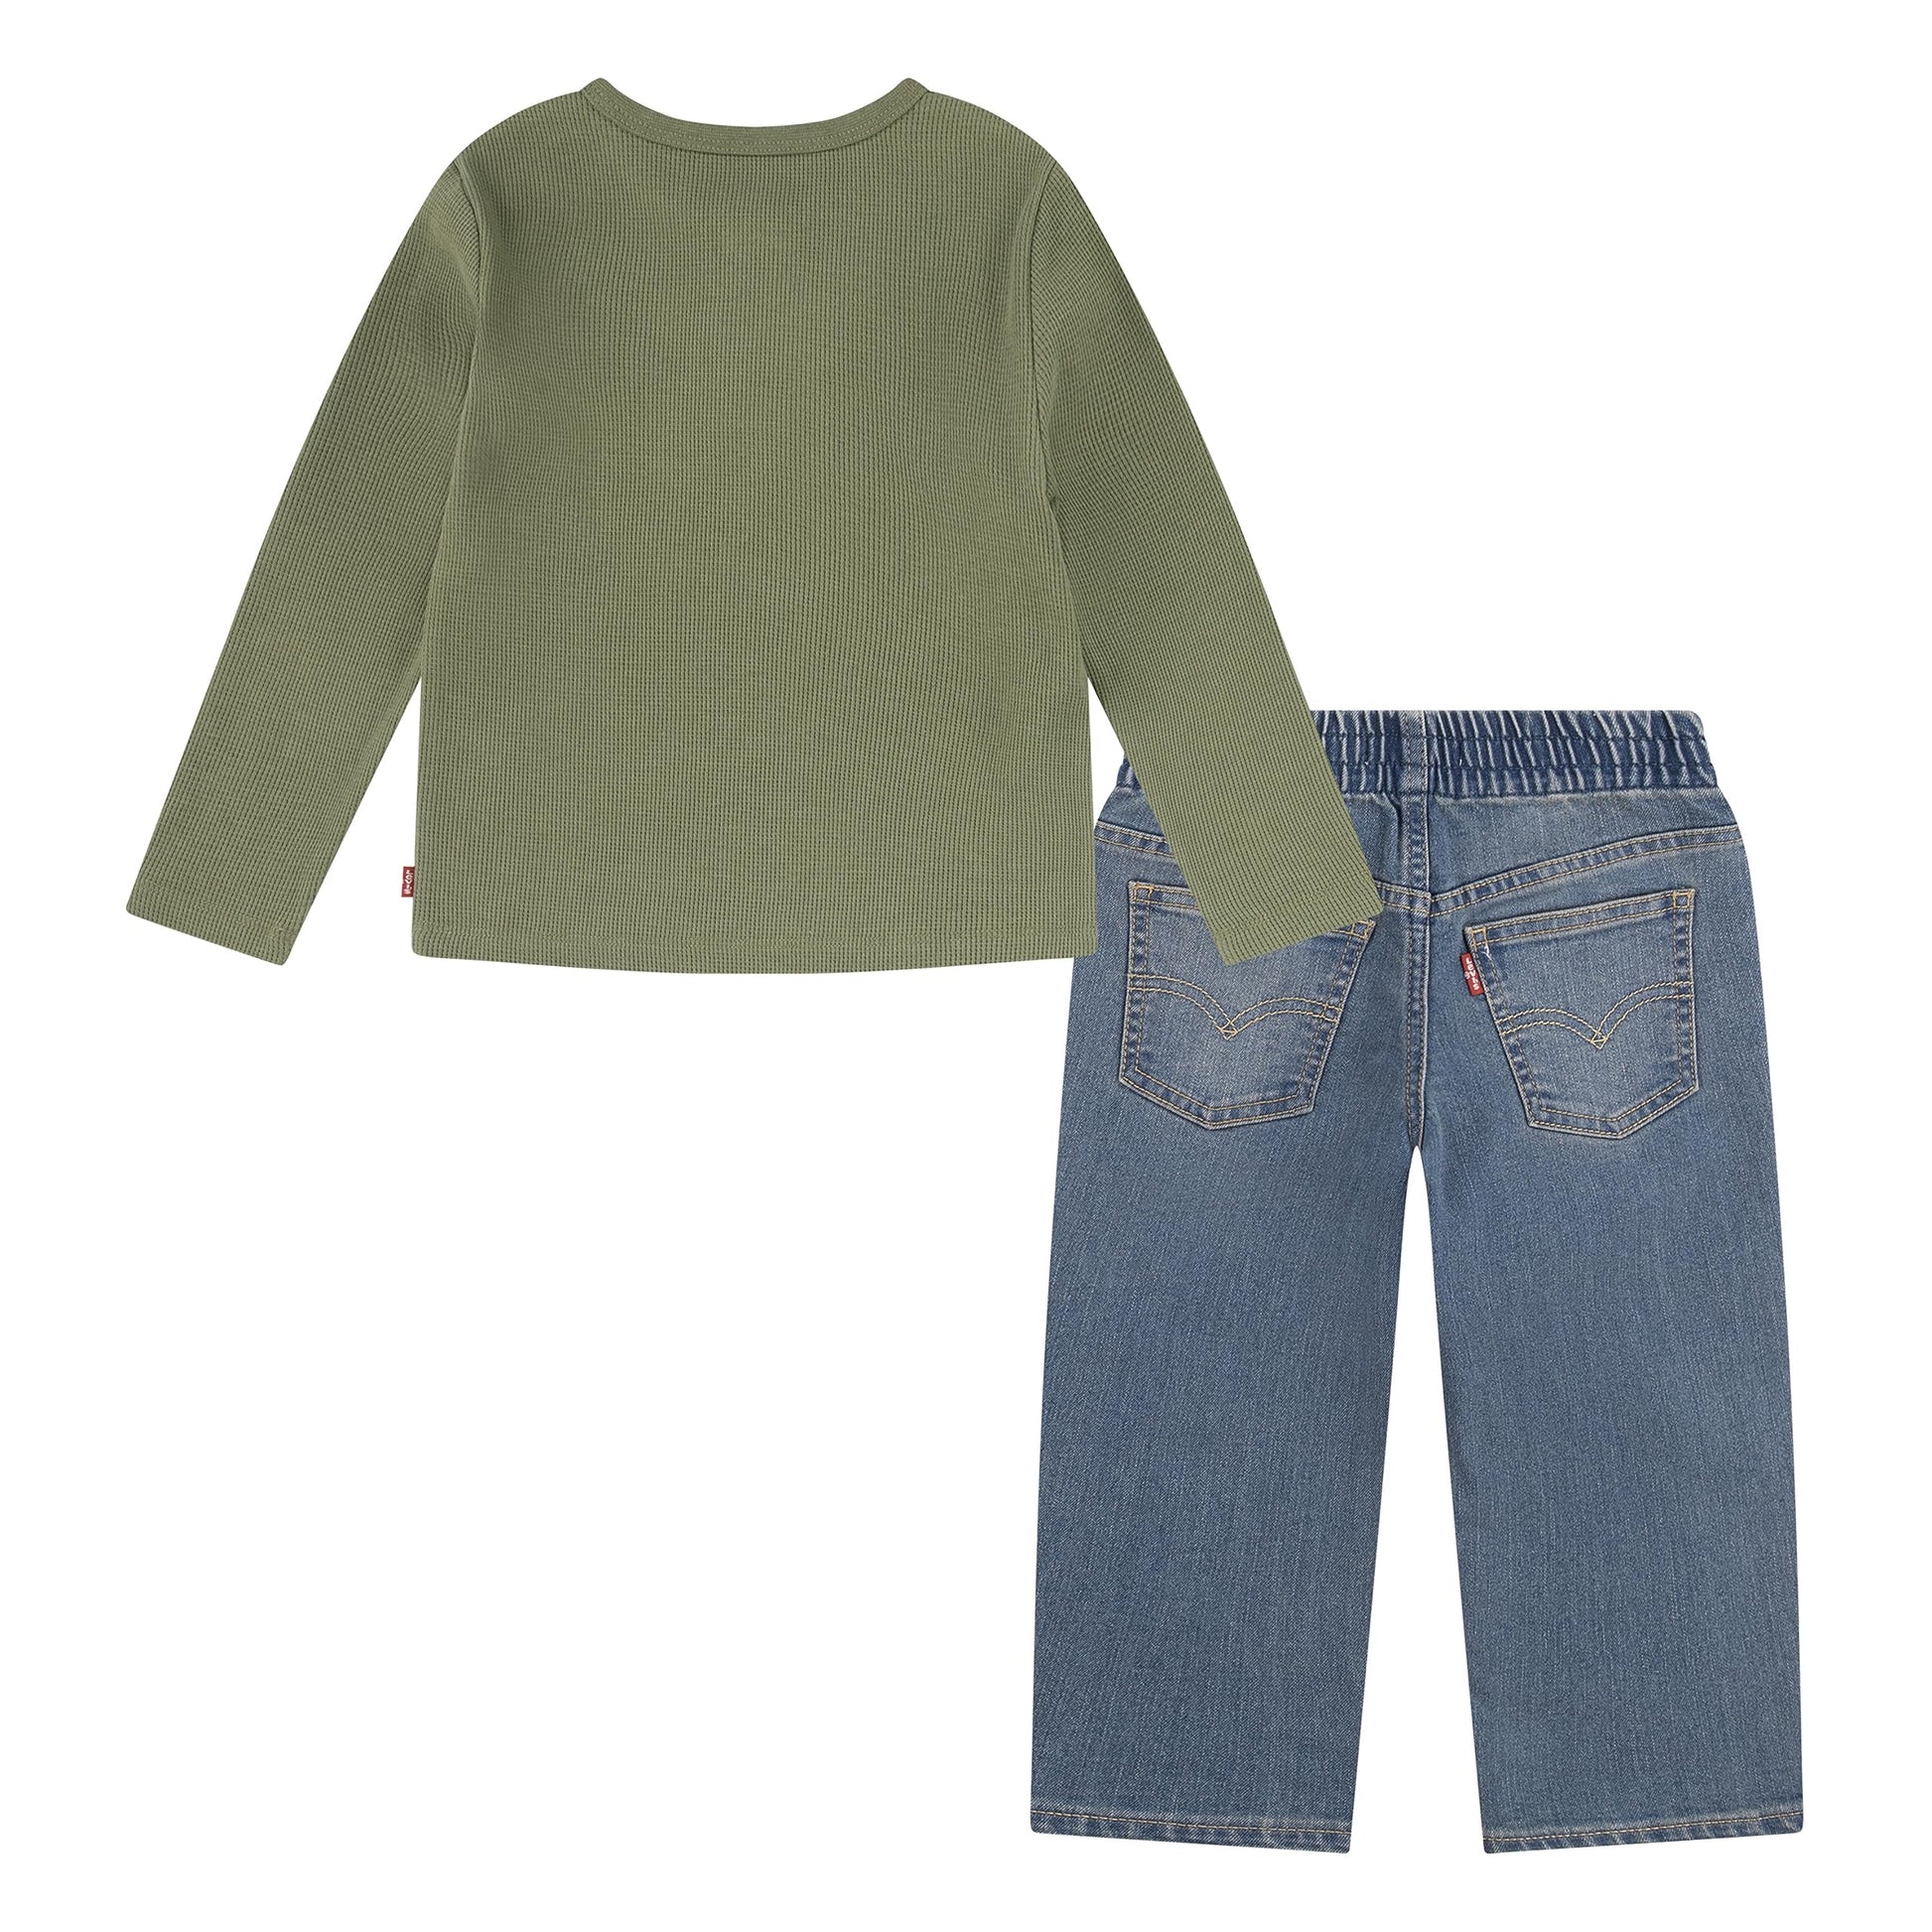 Image 2 of Long Sleeve Thermal Henley and Denim Two-Piece Outfit Set (Little Kids)